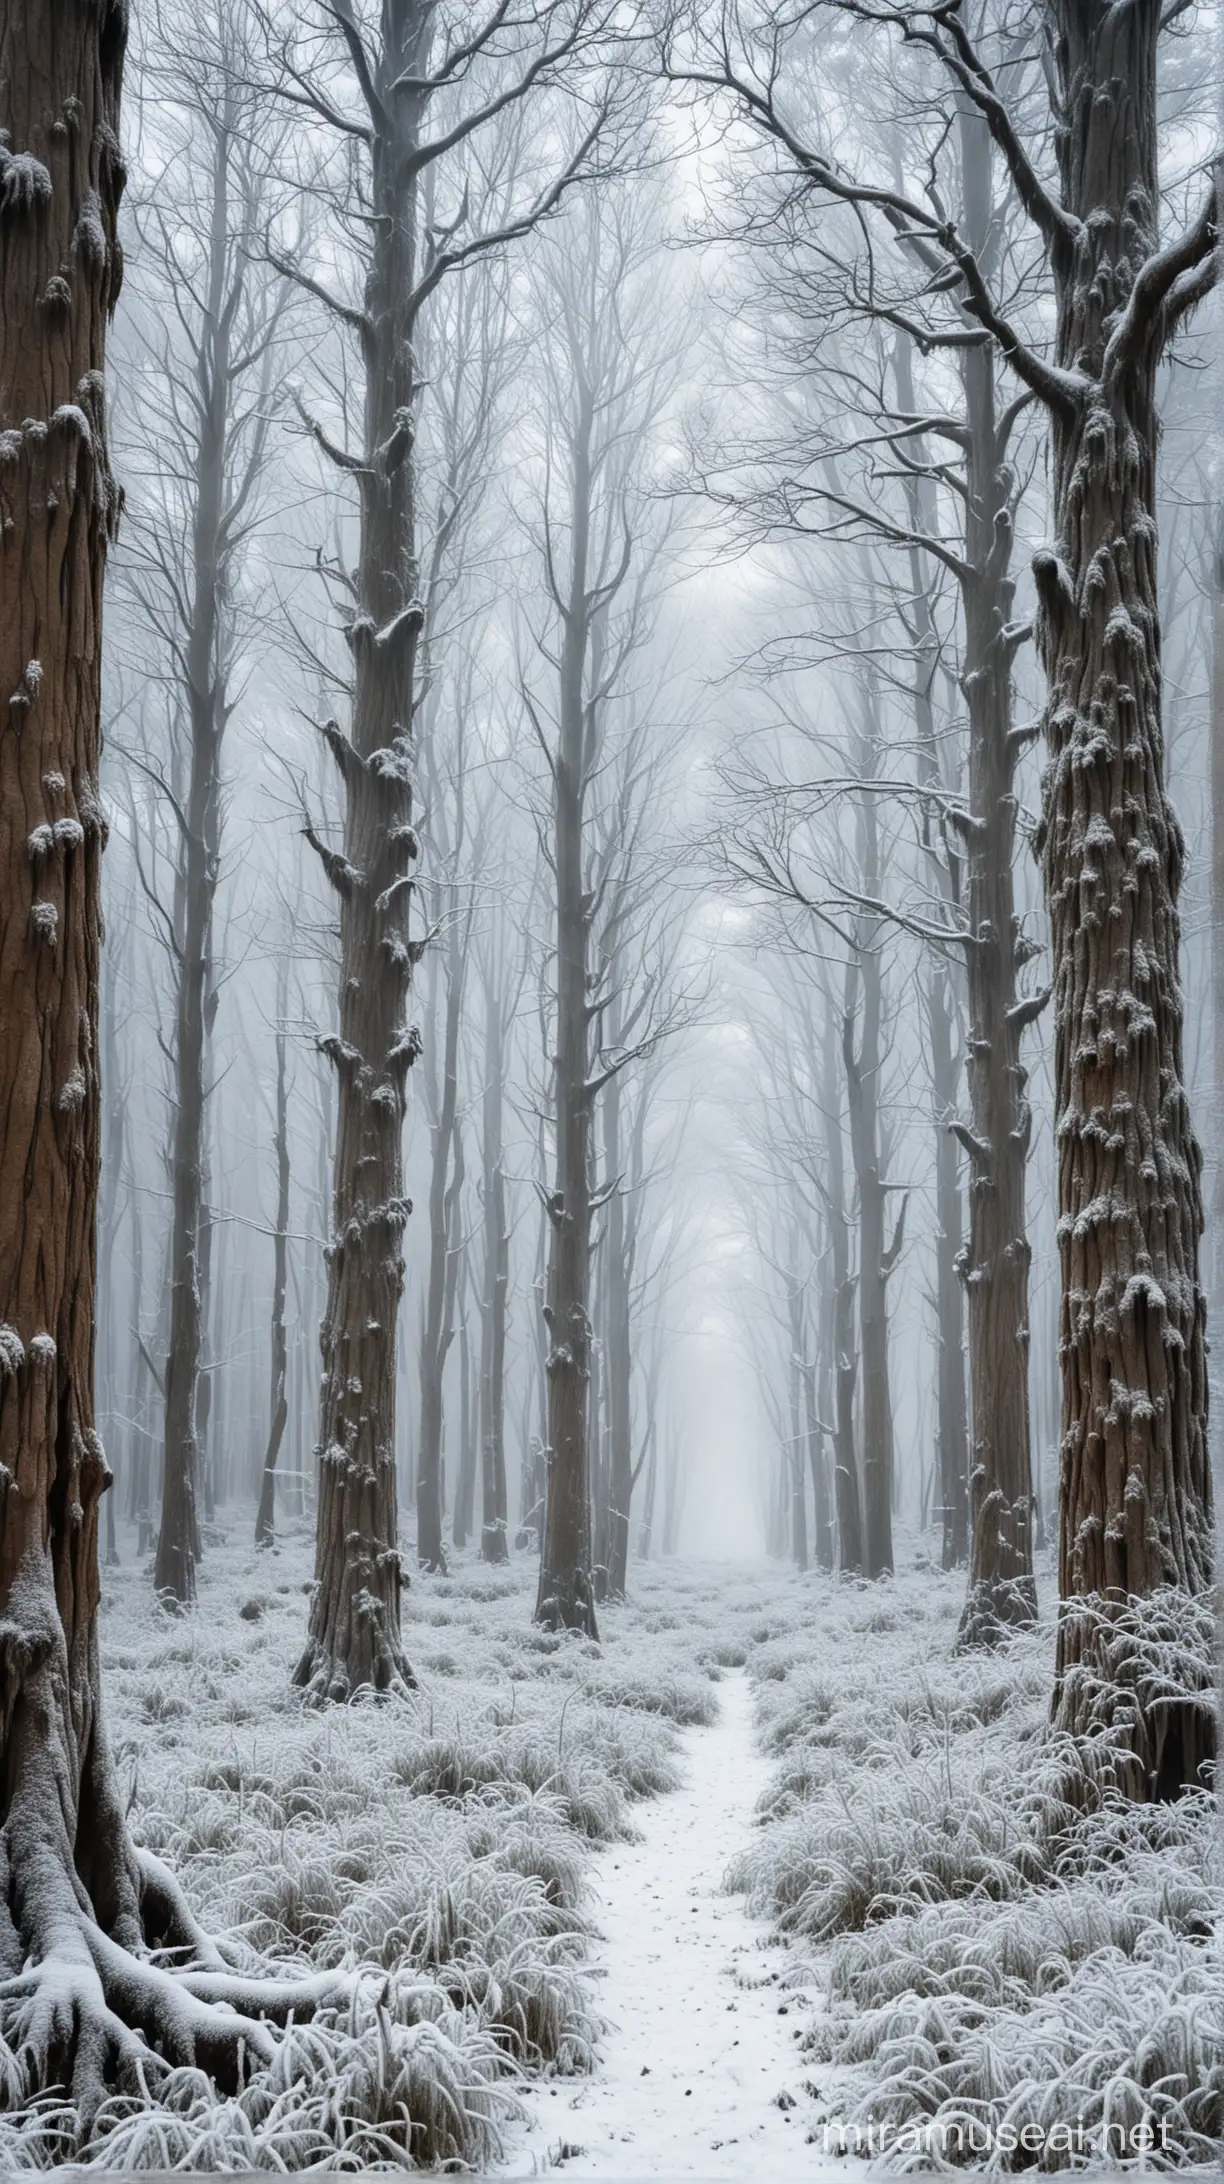 A snowy forest scene with tall, ancient trees covered in frost, creating a mystical atmosphere.
